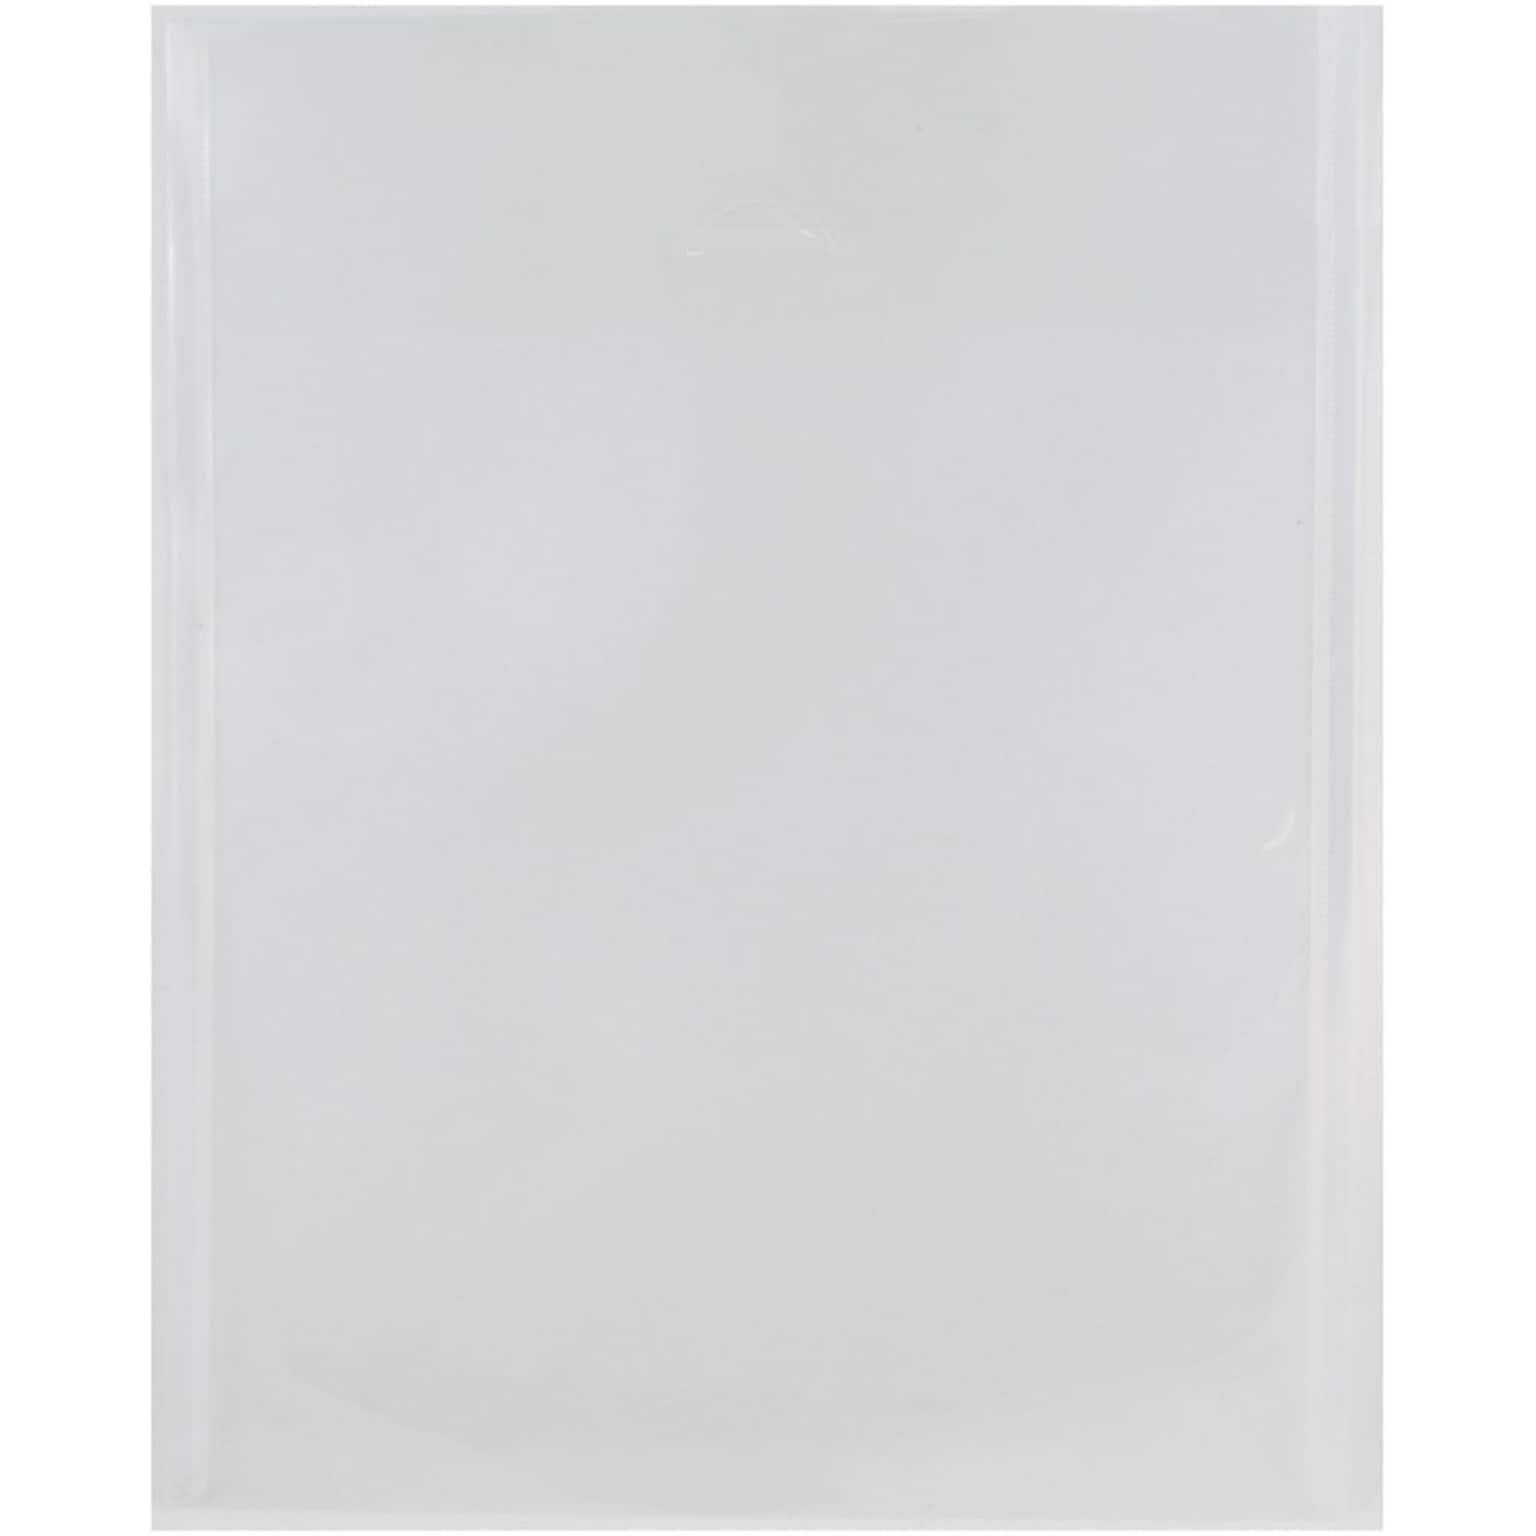 JAM Paper® Plastic Envelopes with Tuck Flap Closure, Open End, 11 x 14, Clear, 12/Pack (1541749)